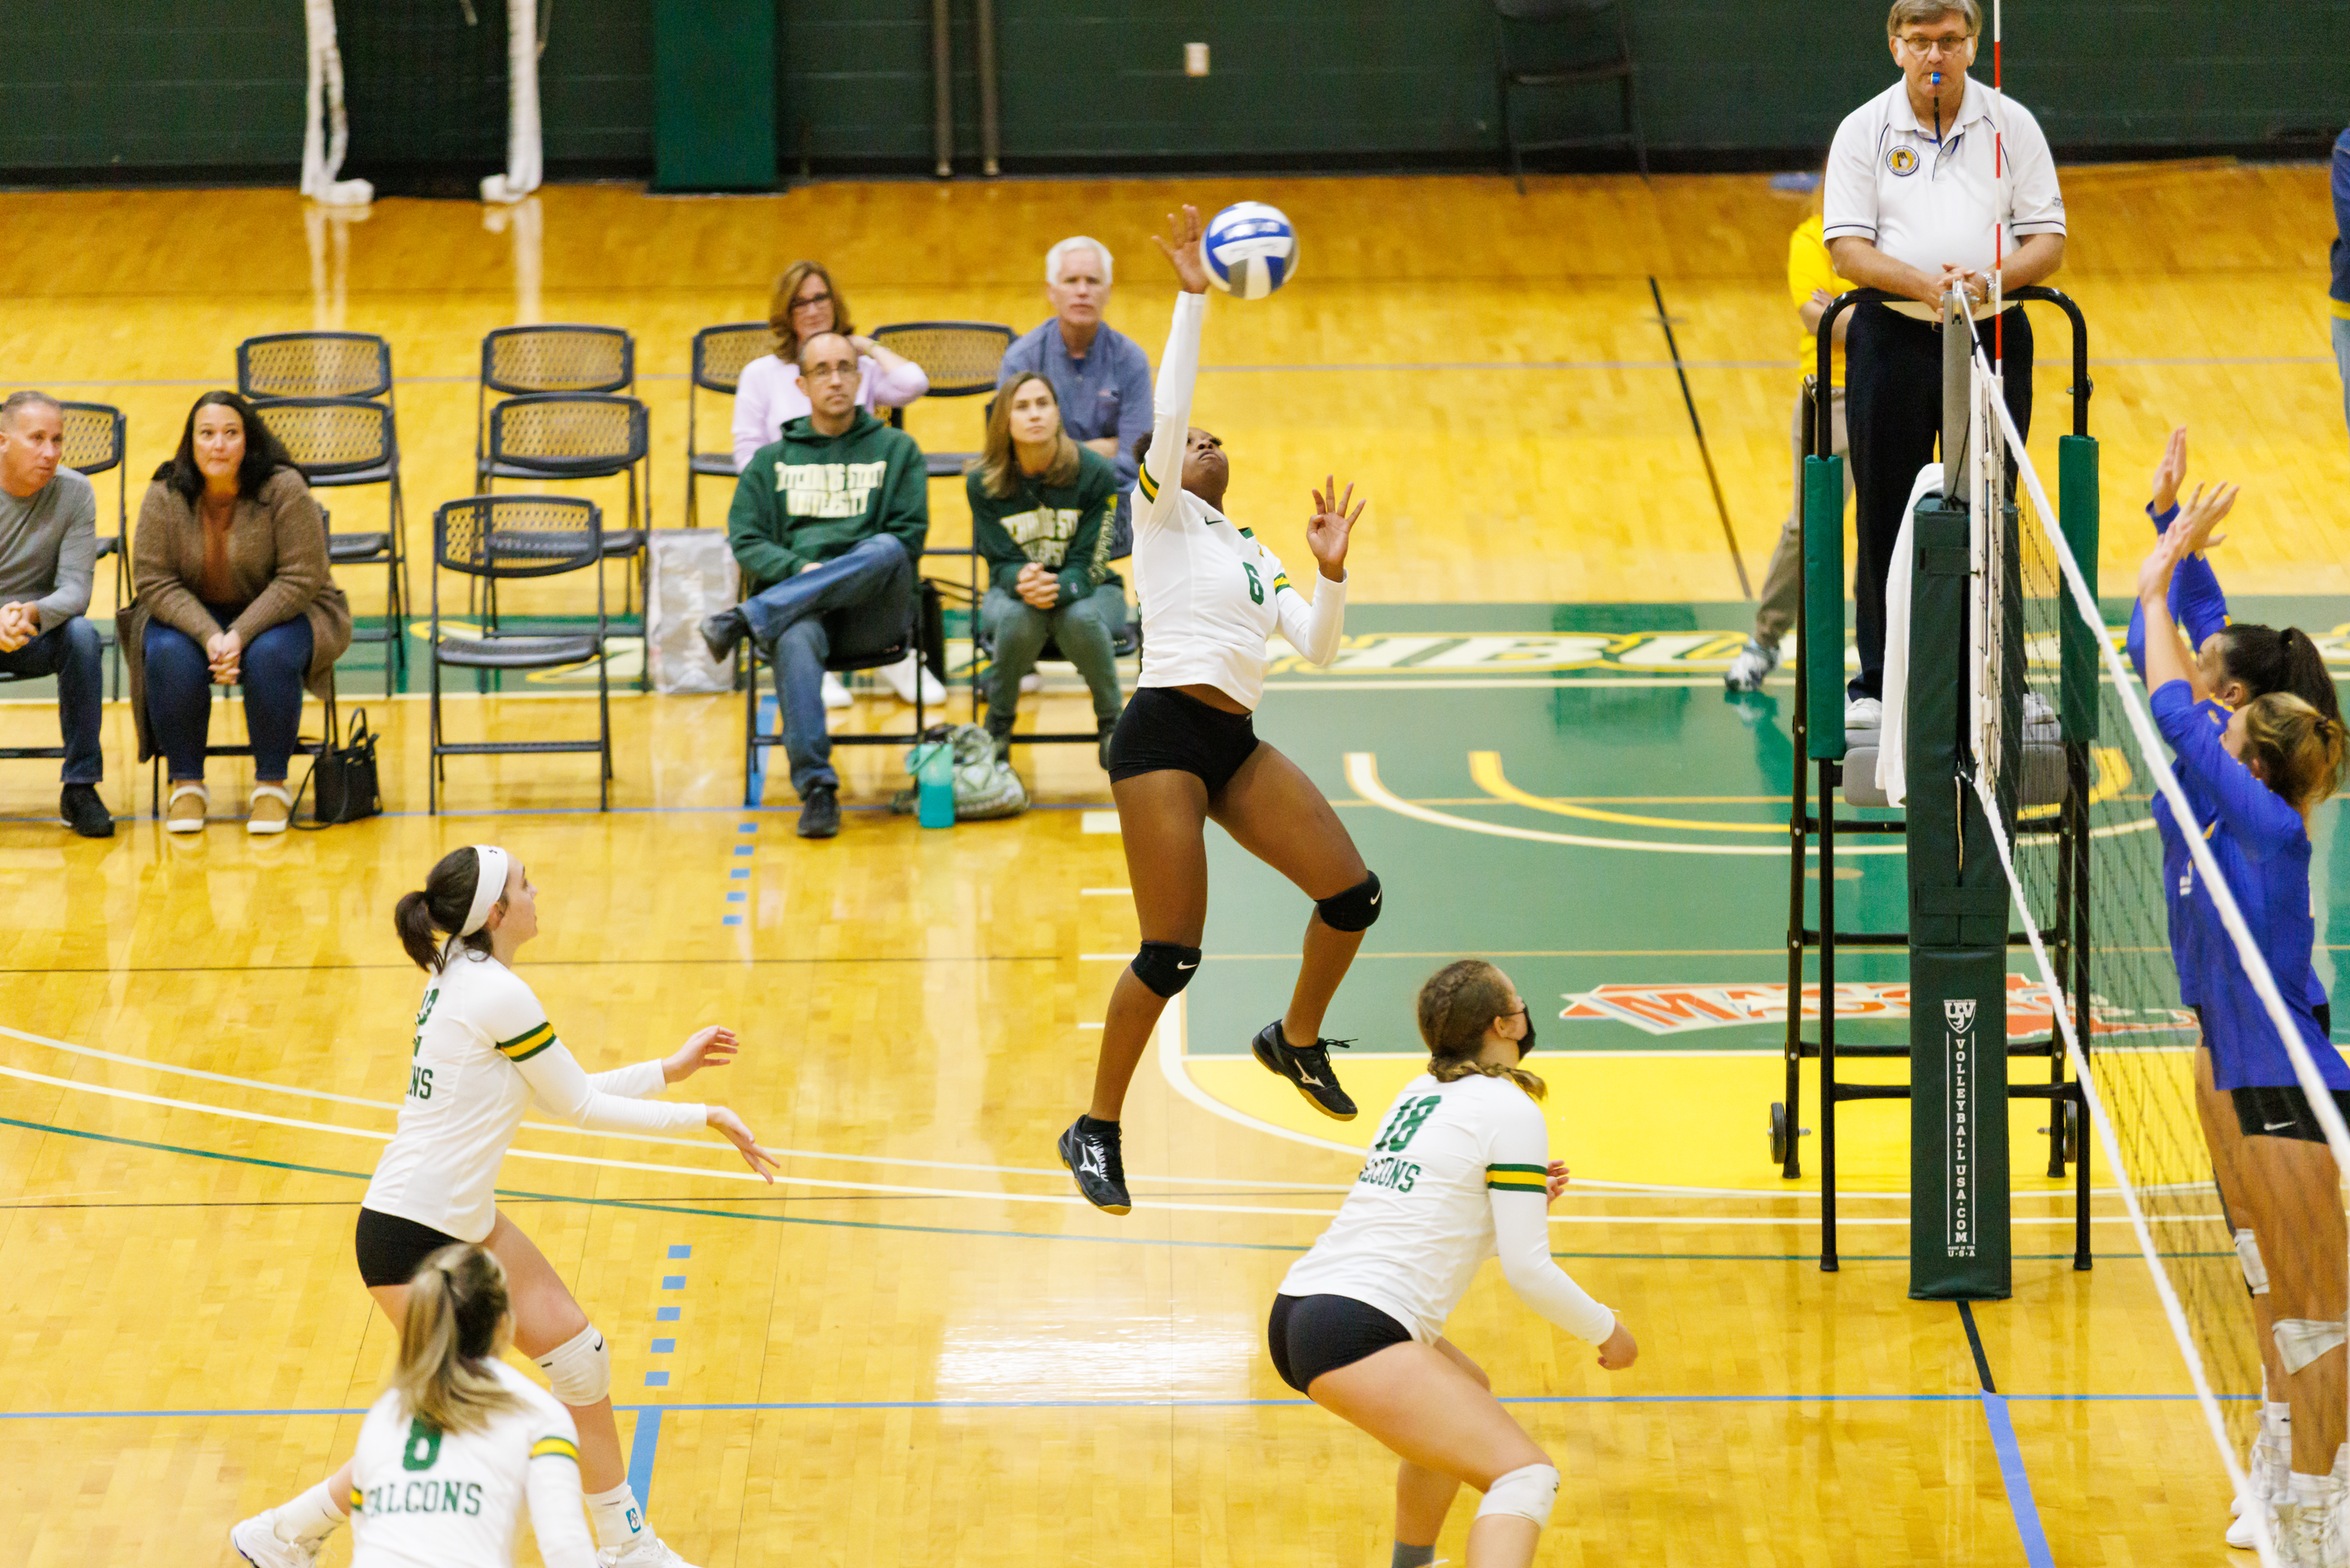 Falcons Take On Dutchwomen And Rams In Non-Conference Tri-Match